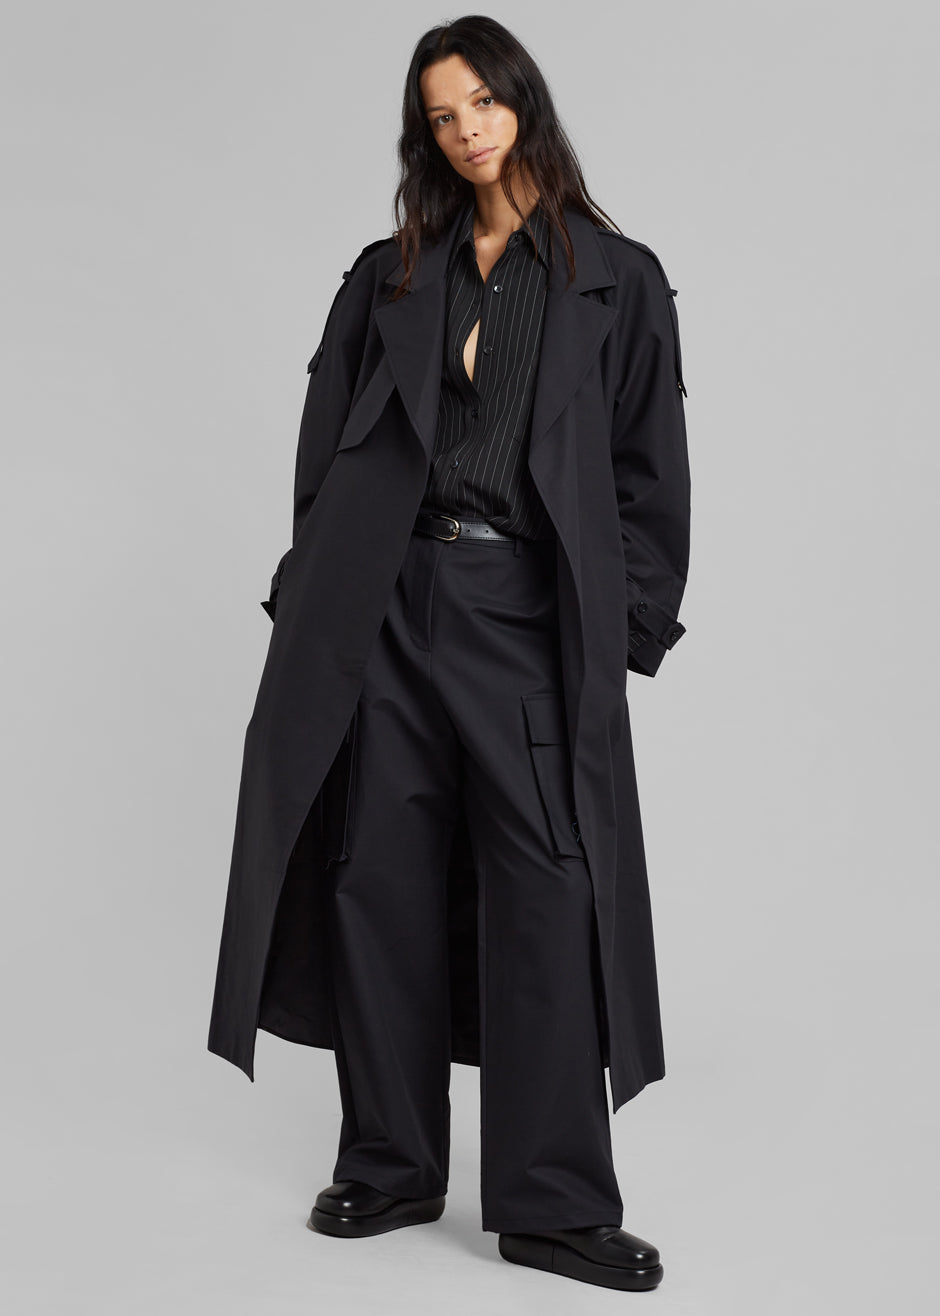 Suzanne Trench Coat - Black - 5